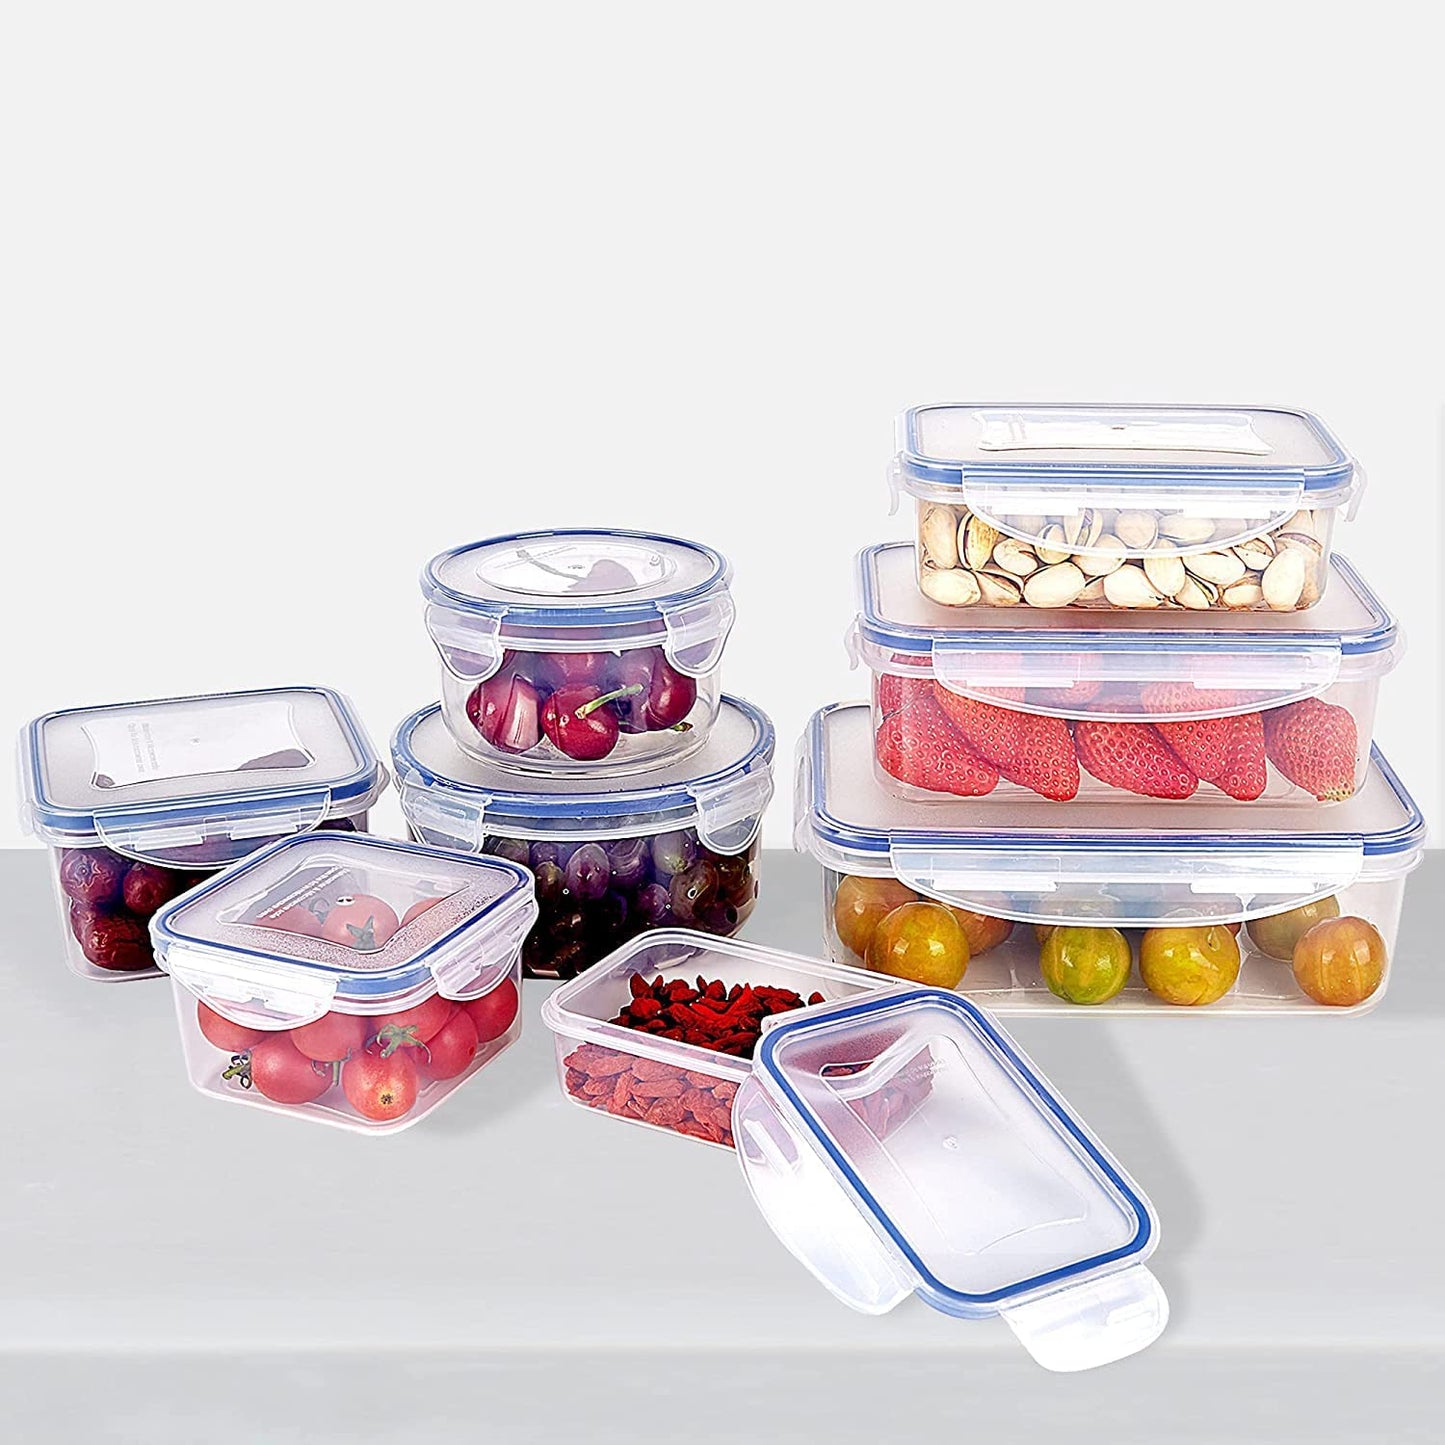 BPA FREE - Lock and & Lock Plastic Food Storage Containers Cake